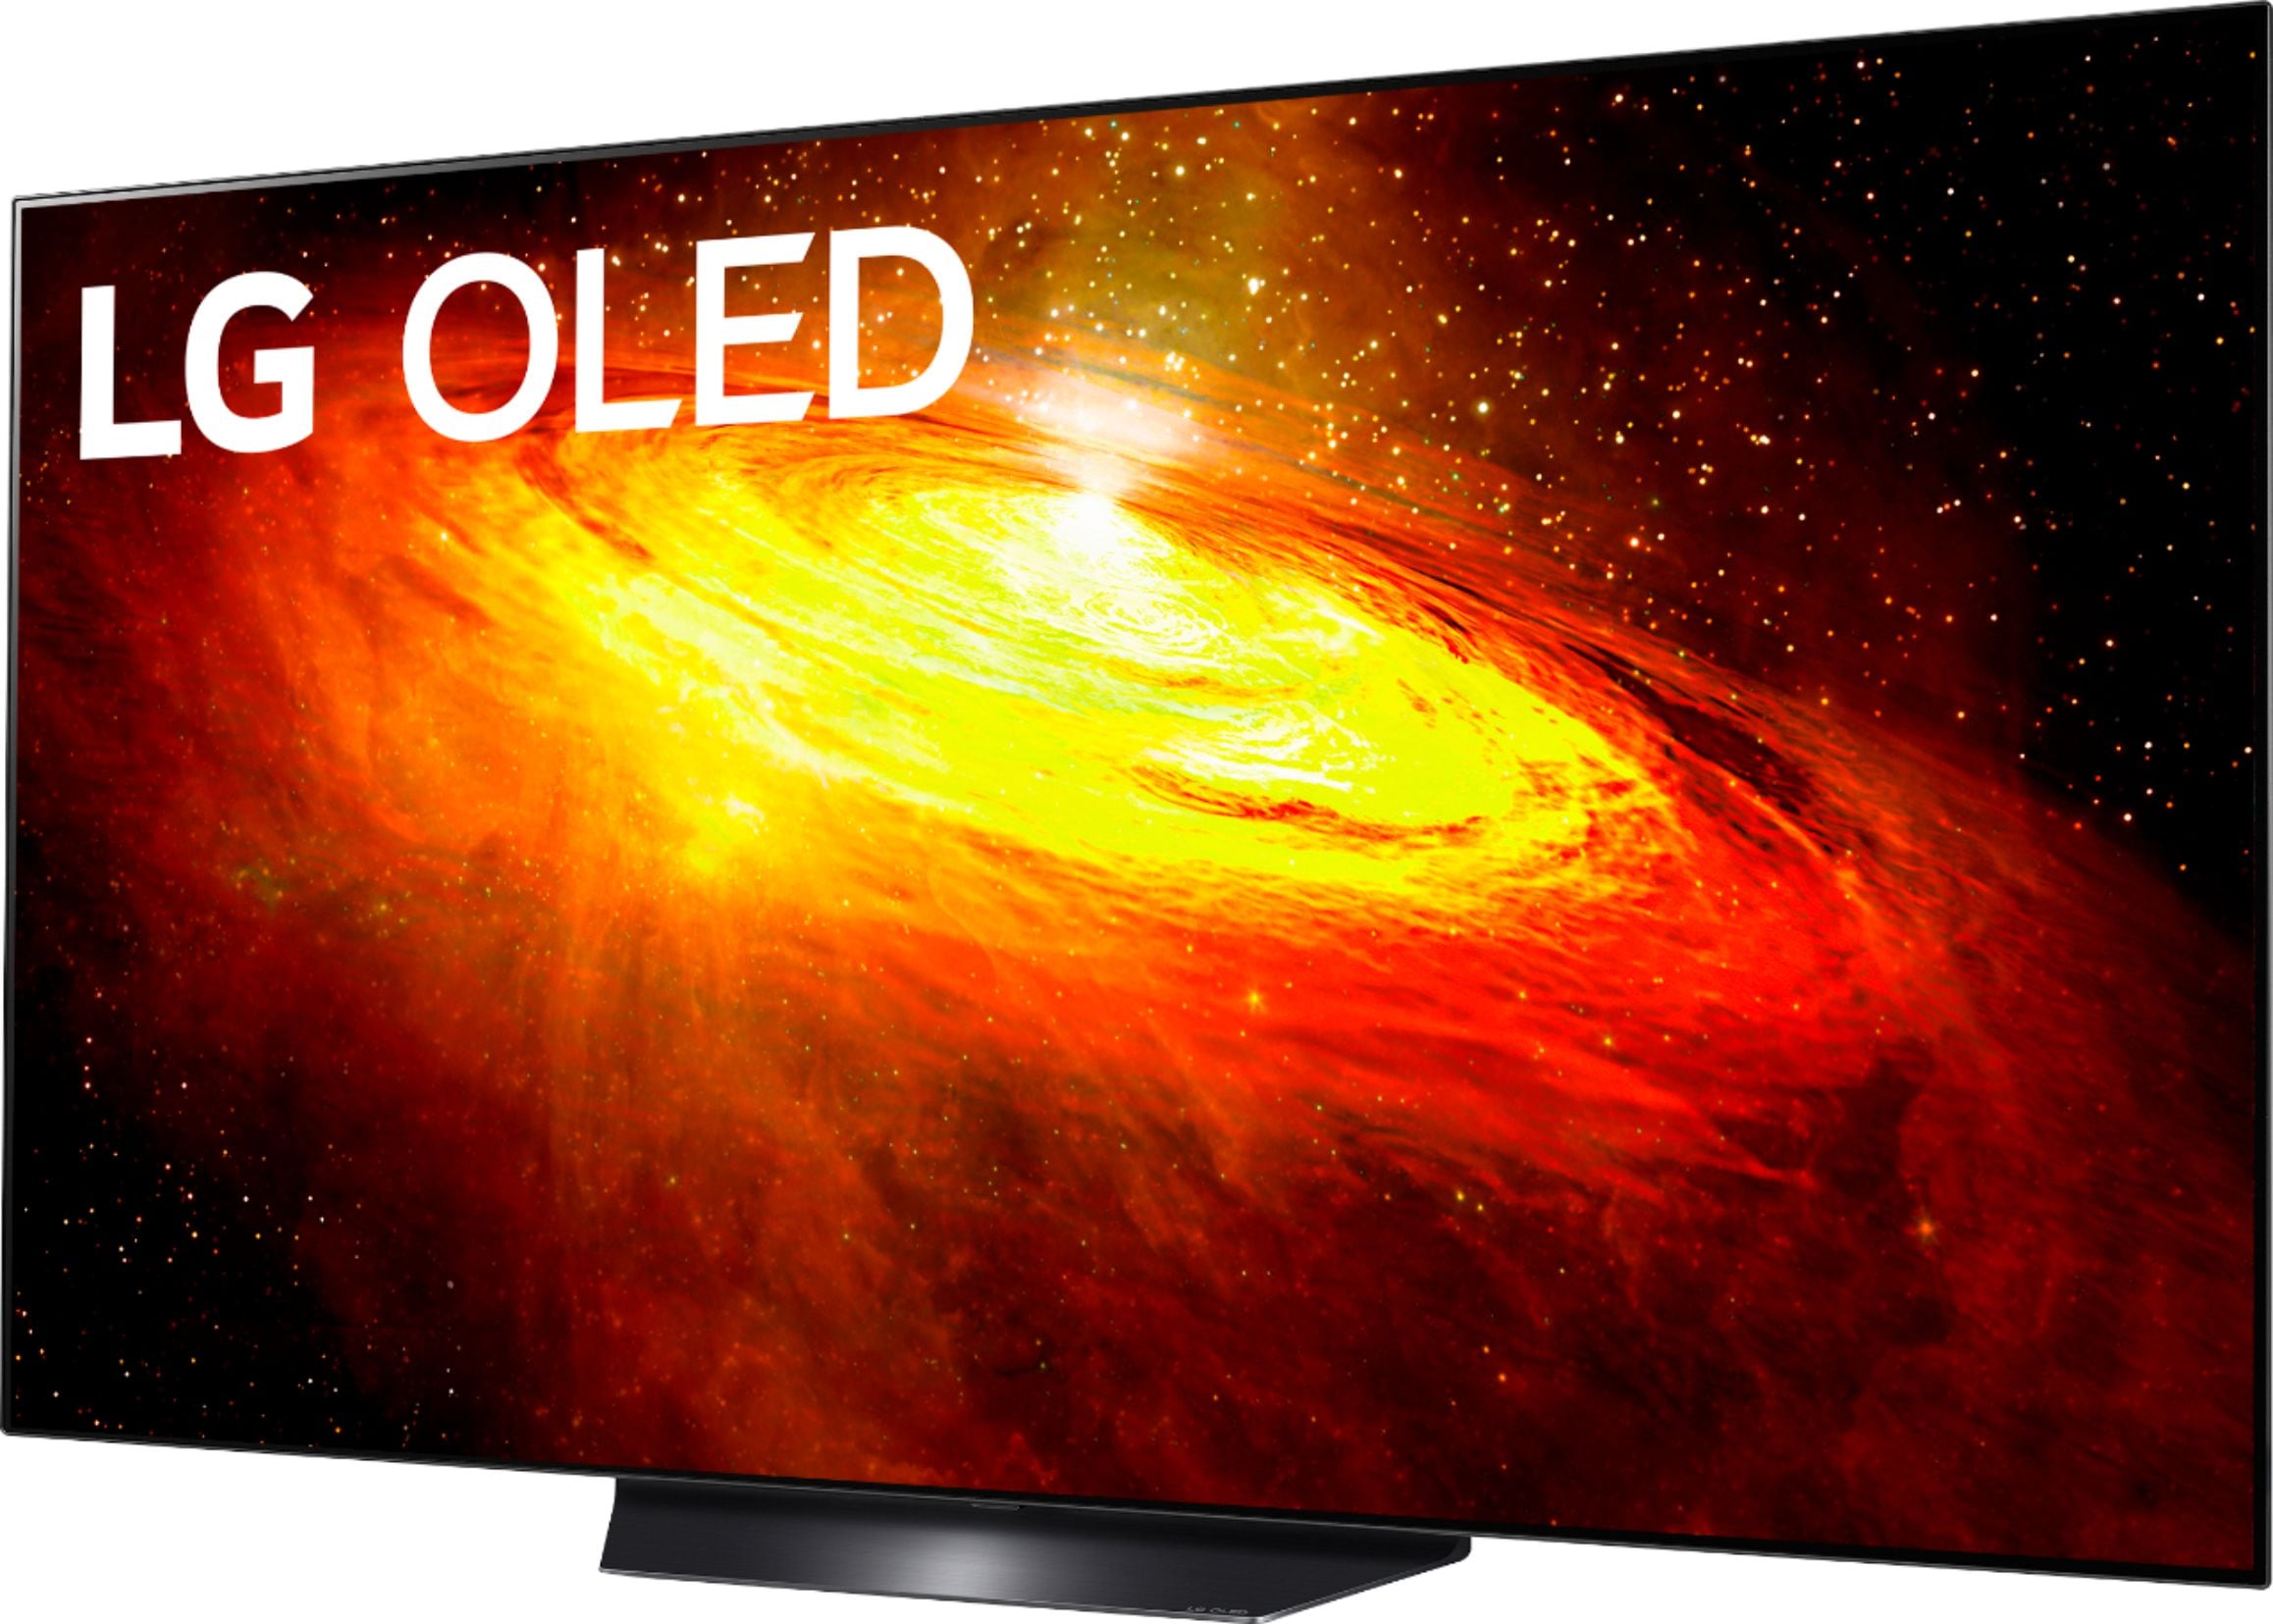 Sam's Club Clearance OLED and QLED TVs, YMMV, In-club only, LG 55 BX $600, Vizio P65 $640